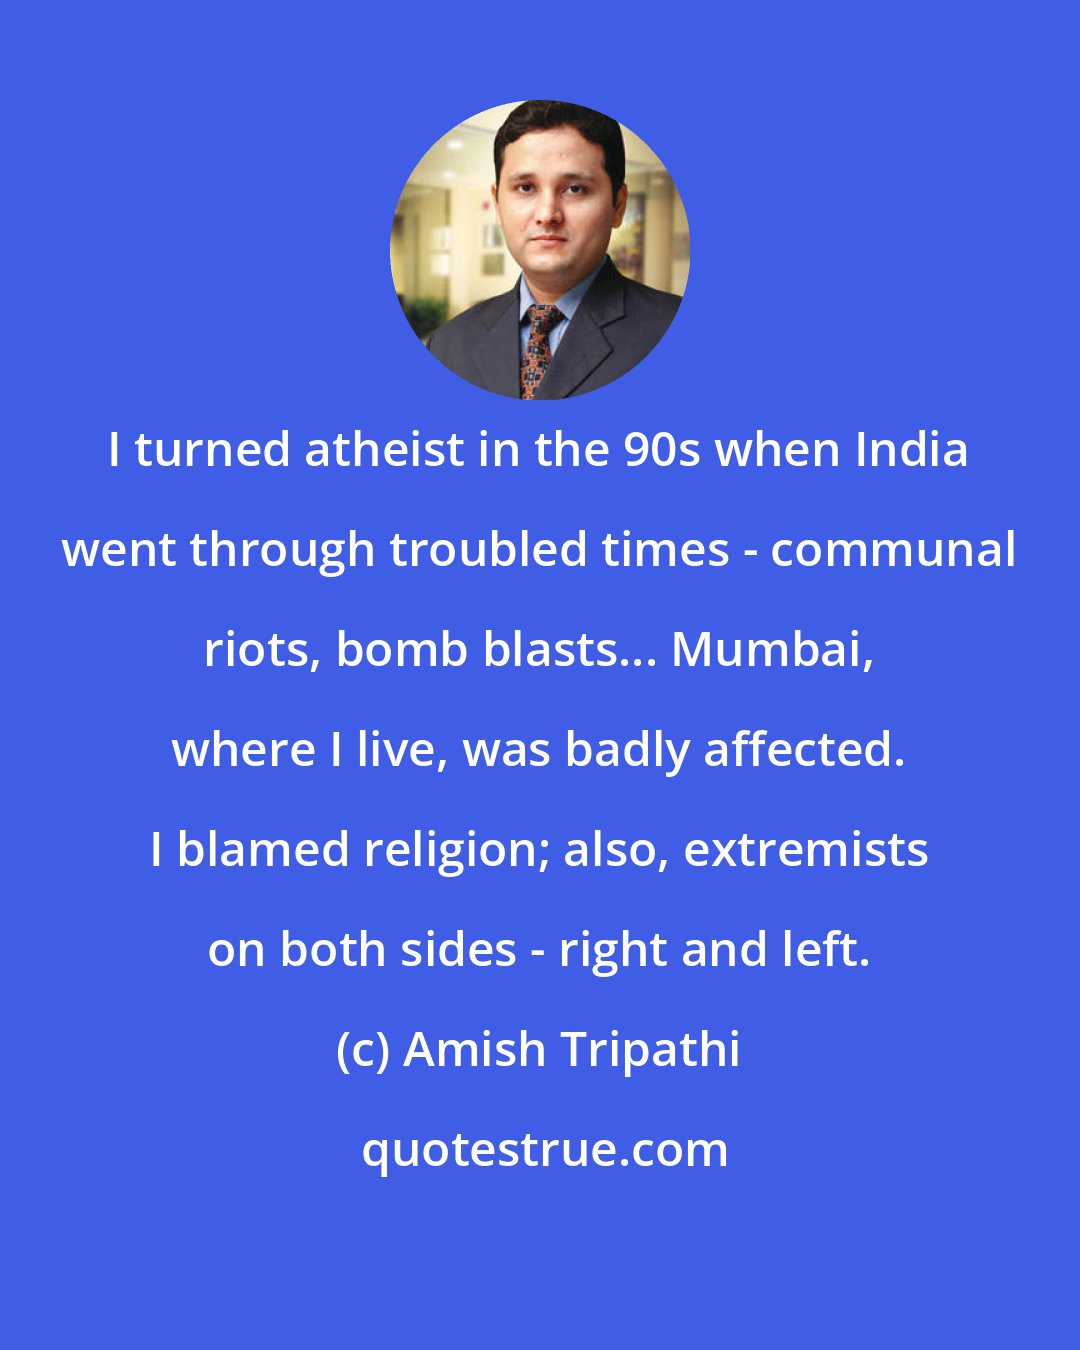 Amish Tripathi: I turned atheist in the 90s when India went through troubled times - communal riots, bomb blasts... Mumbai, where I live, was badly affected. I blamed religion; also, extremists on both sides - right and left.